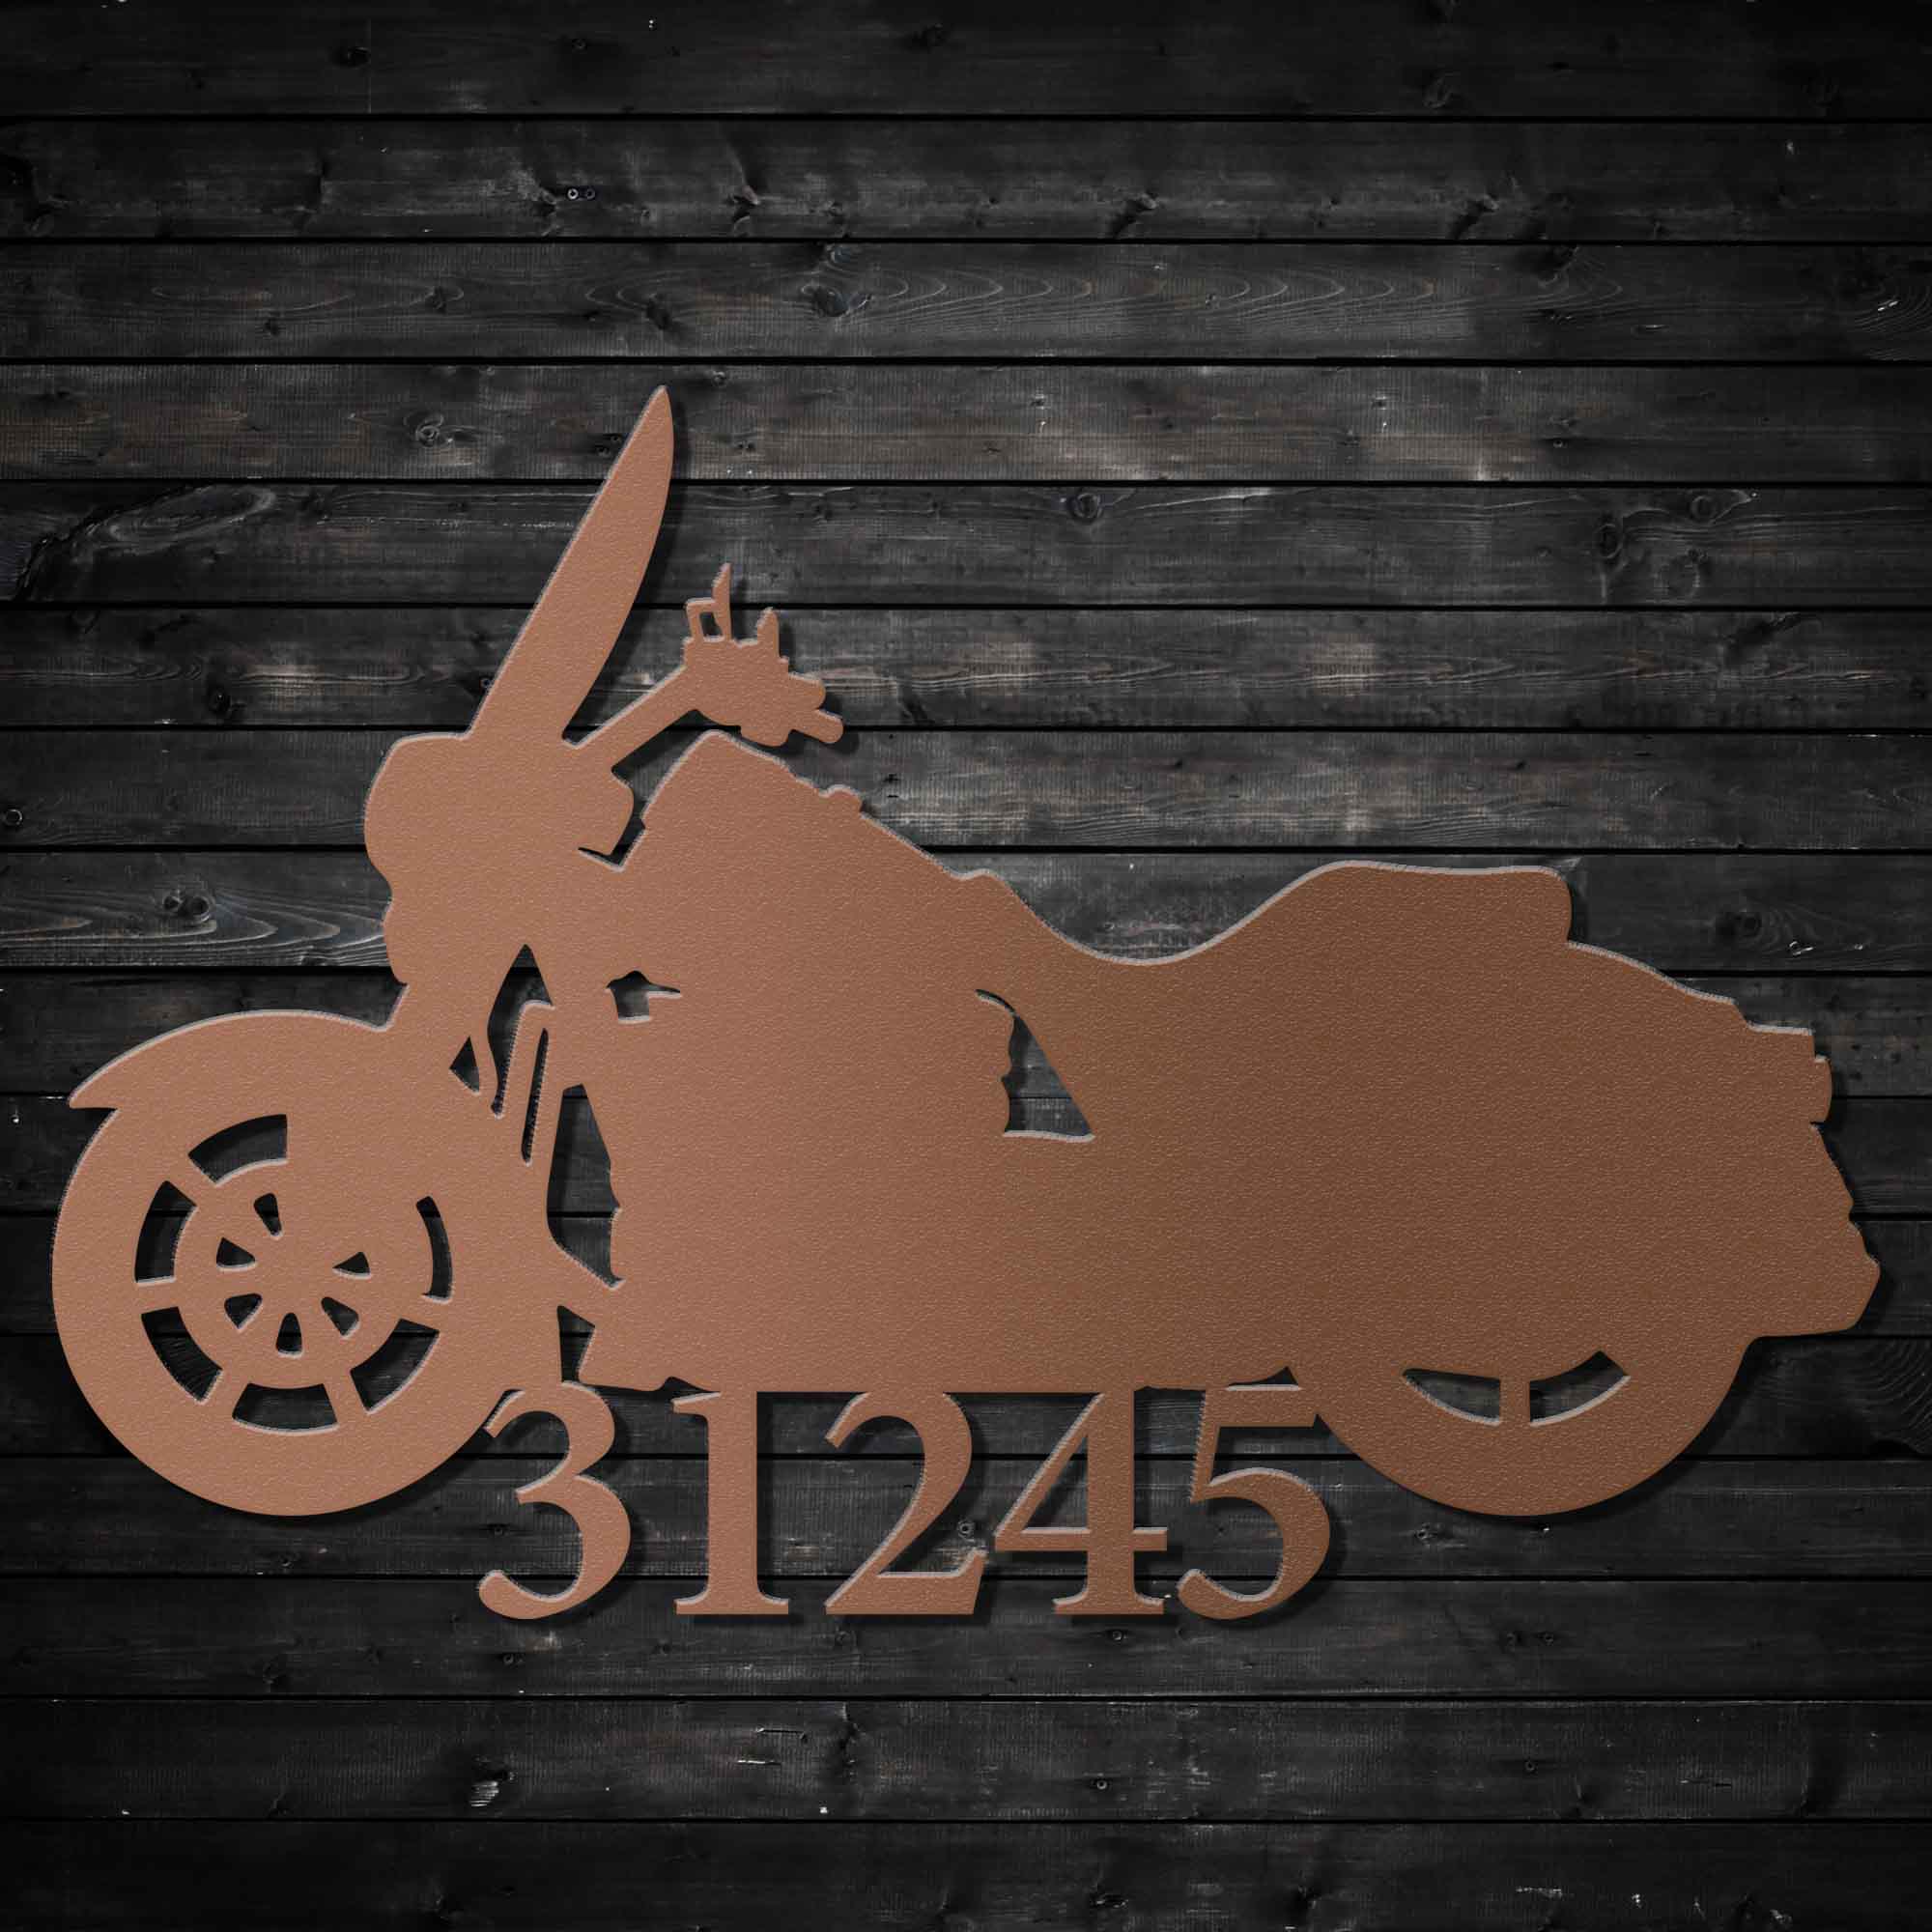 Classic Motorcycle - Personalized Metal Home Address Sign Metal Art - Throttle Mania